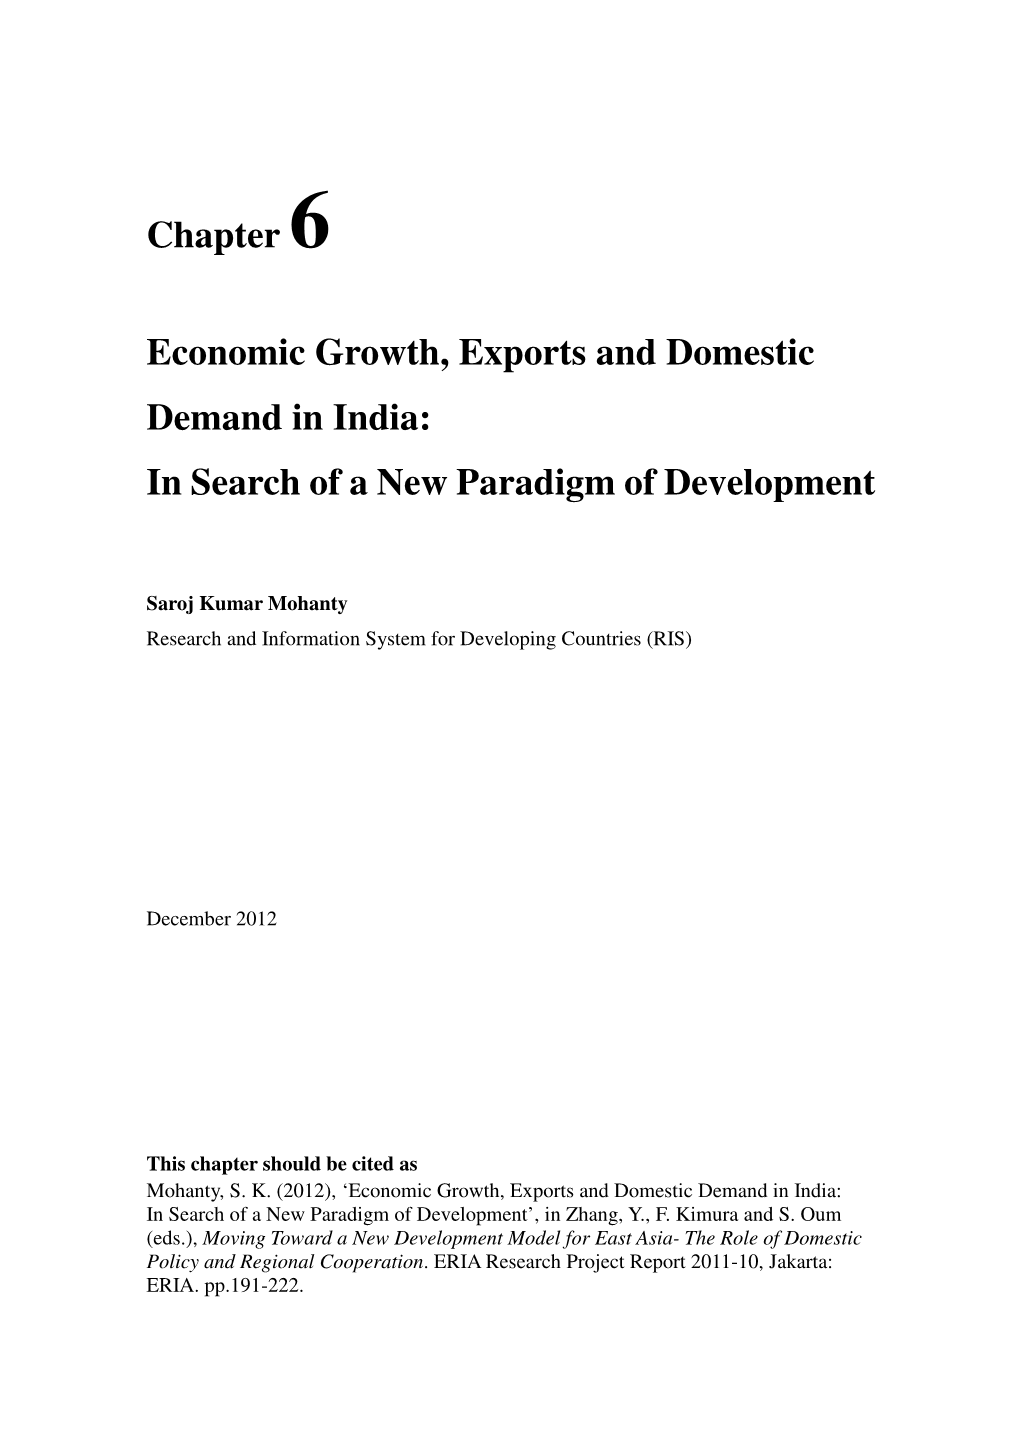 Chapter 6 Economic Growth, Exports and Domestic Demand in India